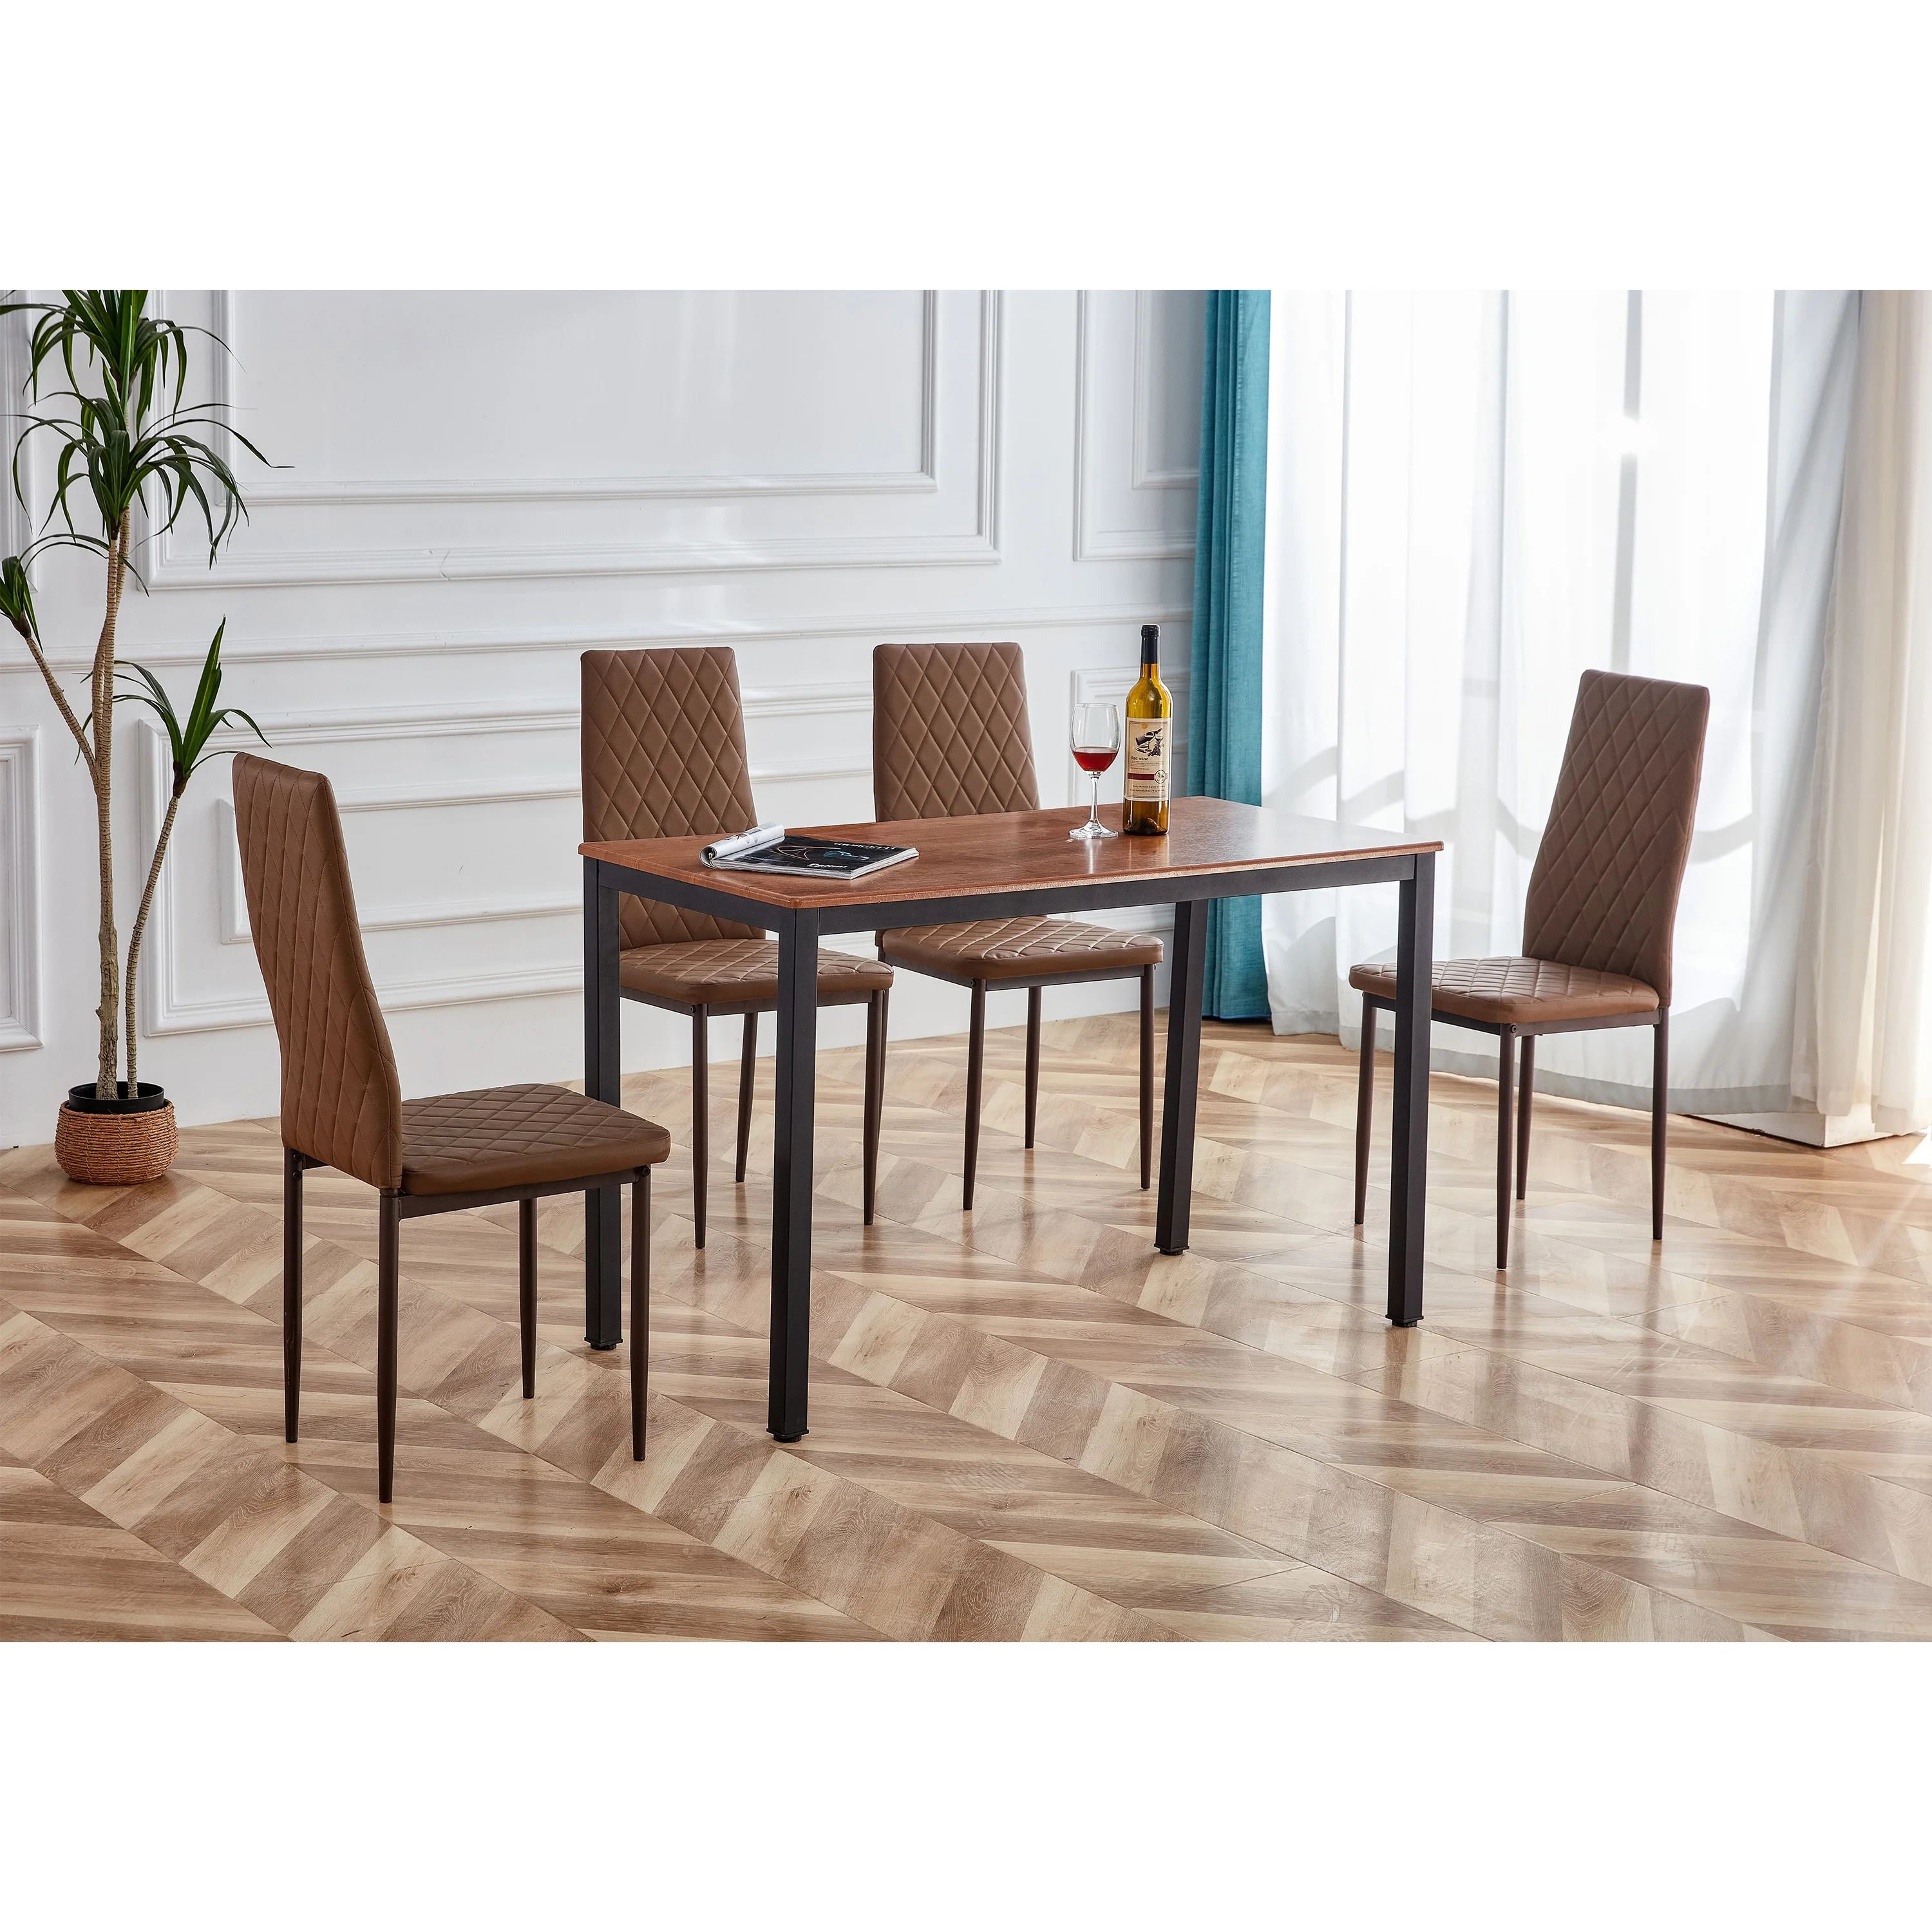 

5pcs Retro Style Dining Table And Chair Hotel Dining Table And Chair Conference Chair Outdoor Activity Chair Pu Leather